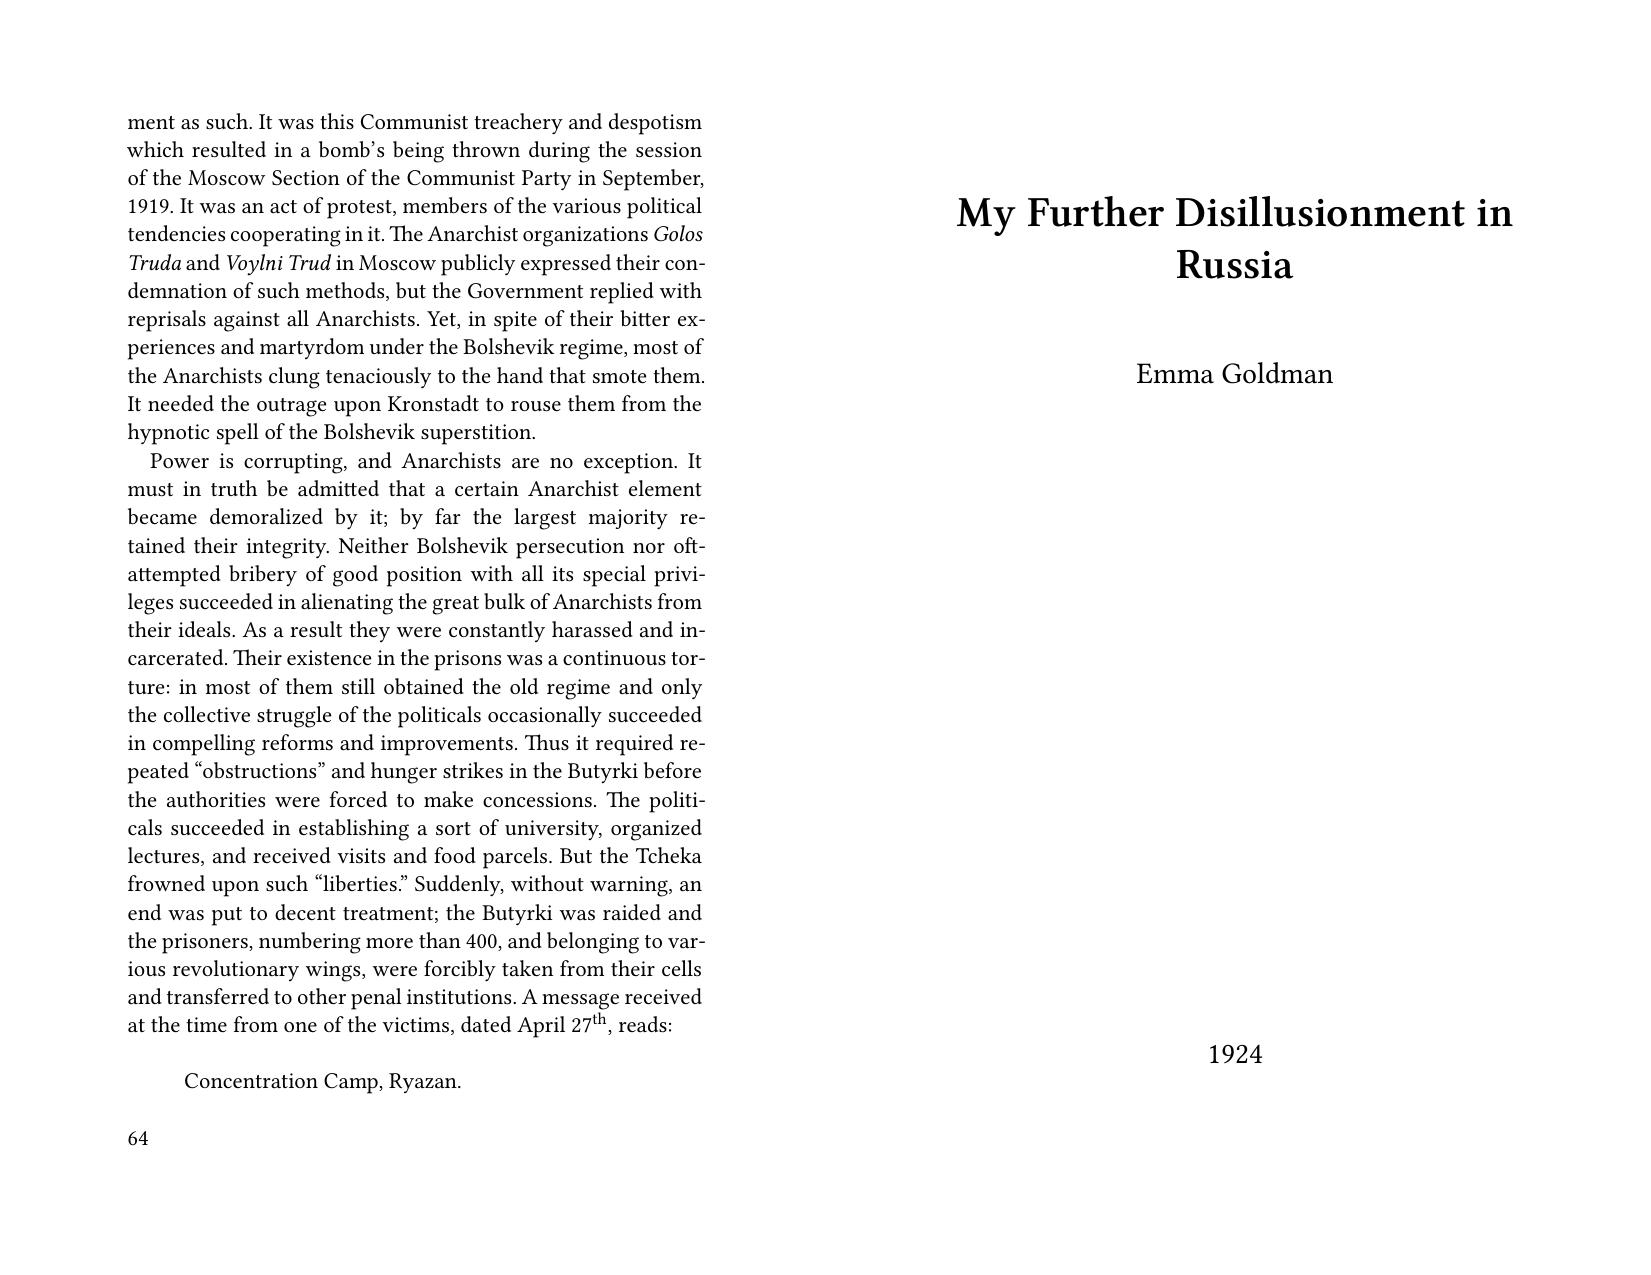 My Further Disillusionment in Russia by Emma Goldman